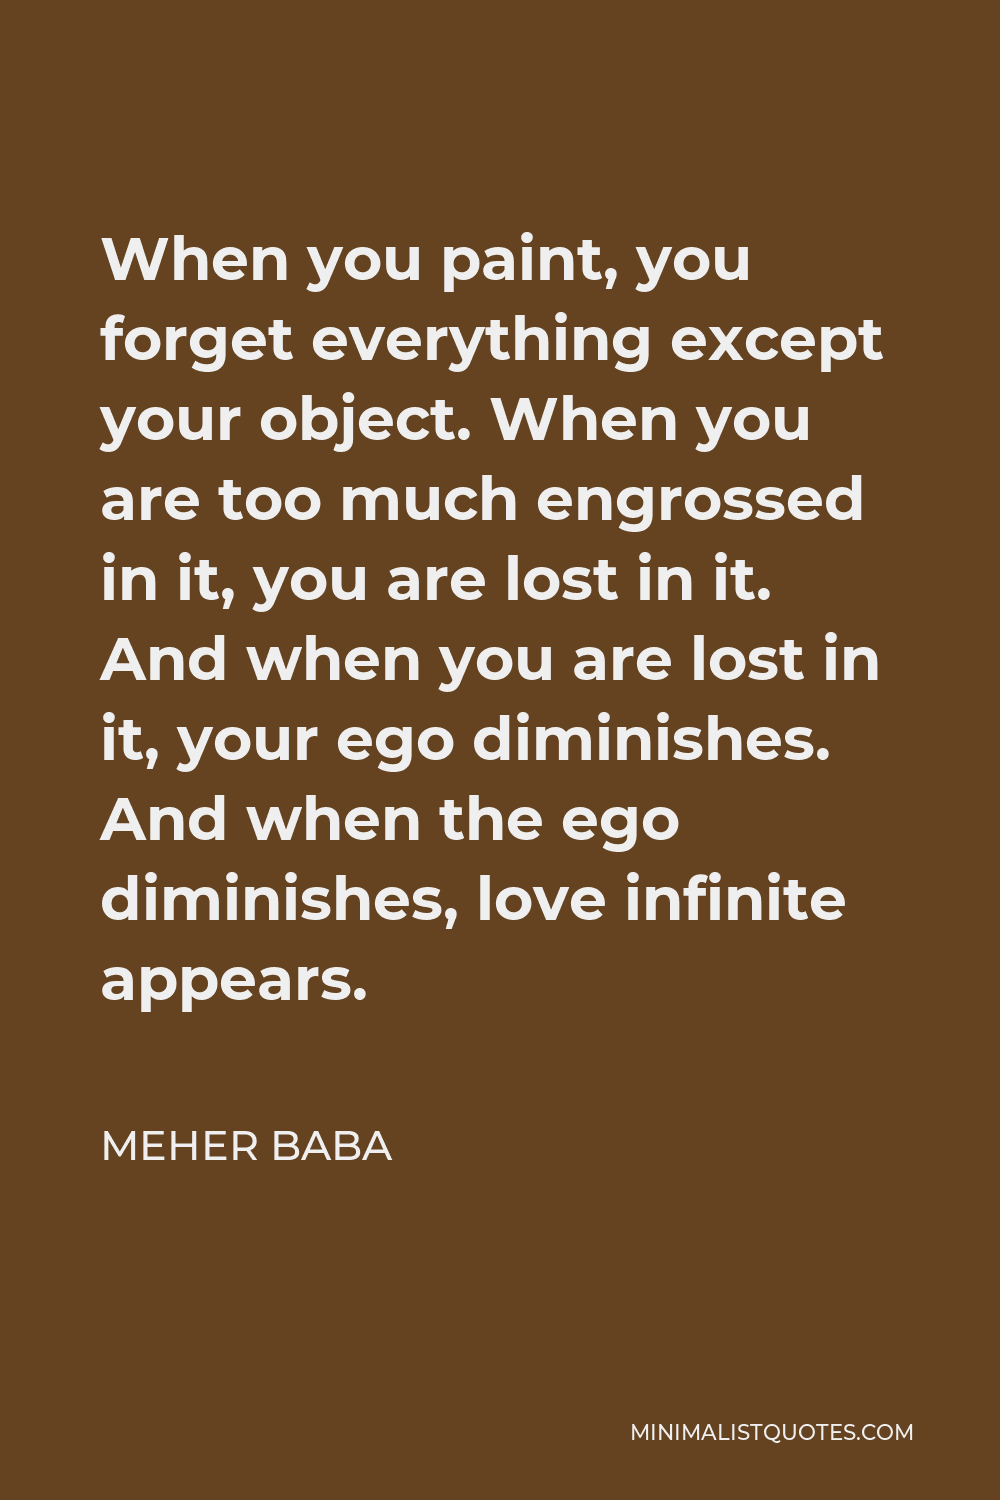 Meher Baba Quote - When you paint, you forget everything except your object. When you are too much engrossed in it, you are lost in it. And when you are lost in it, your ego diminishes. And when the ego diminishes, love infinite appears.